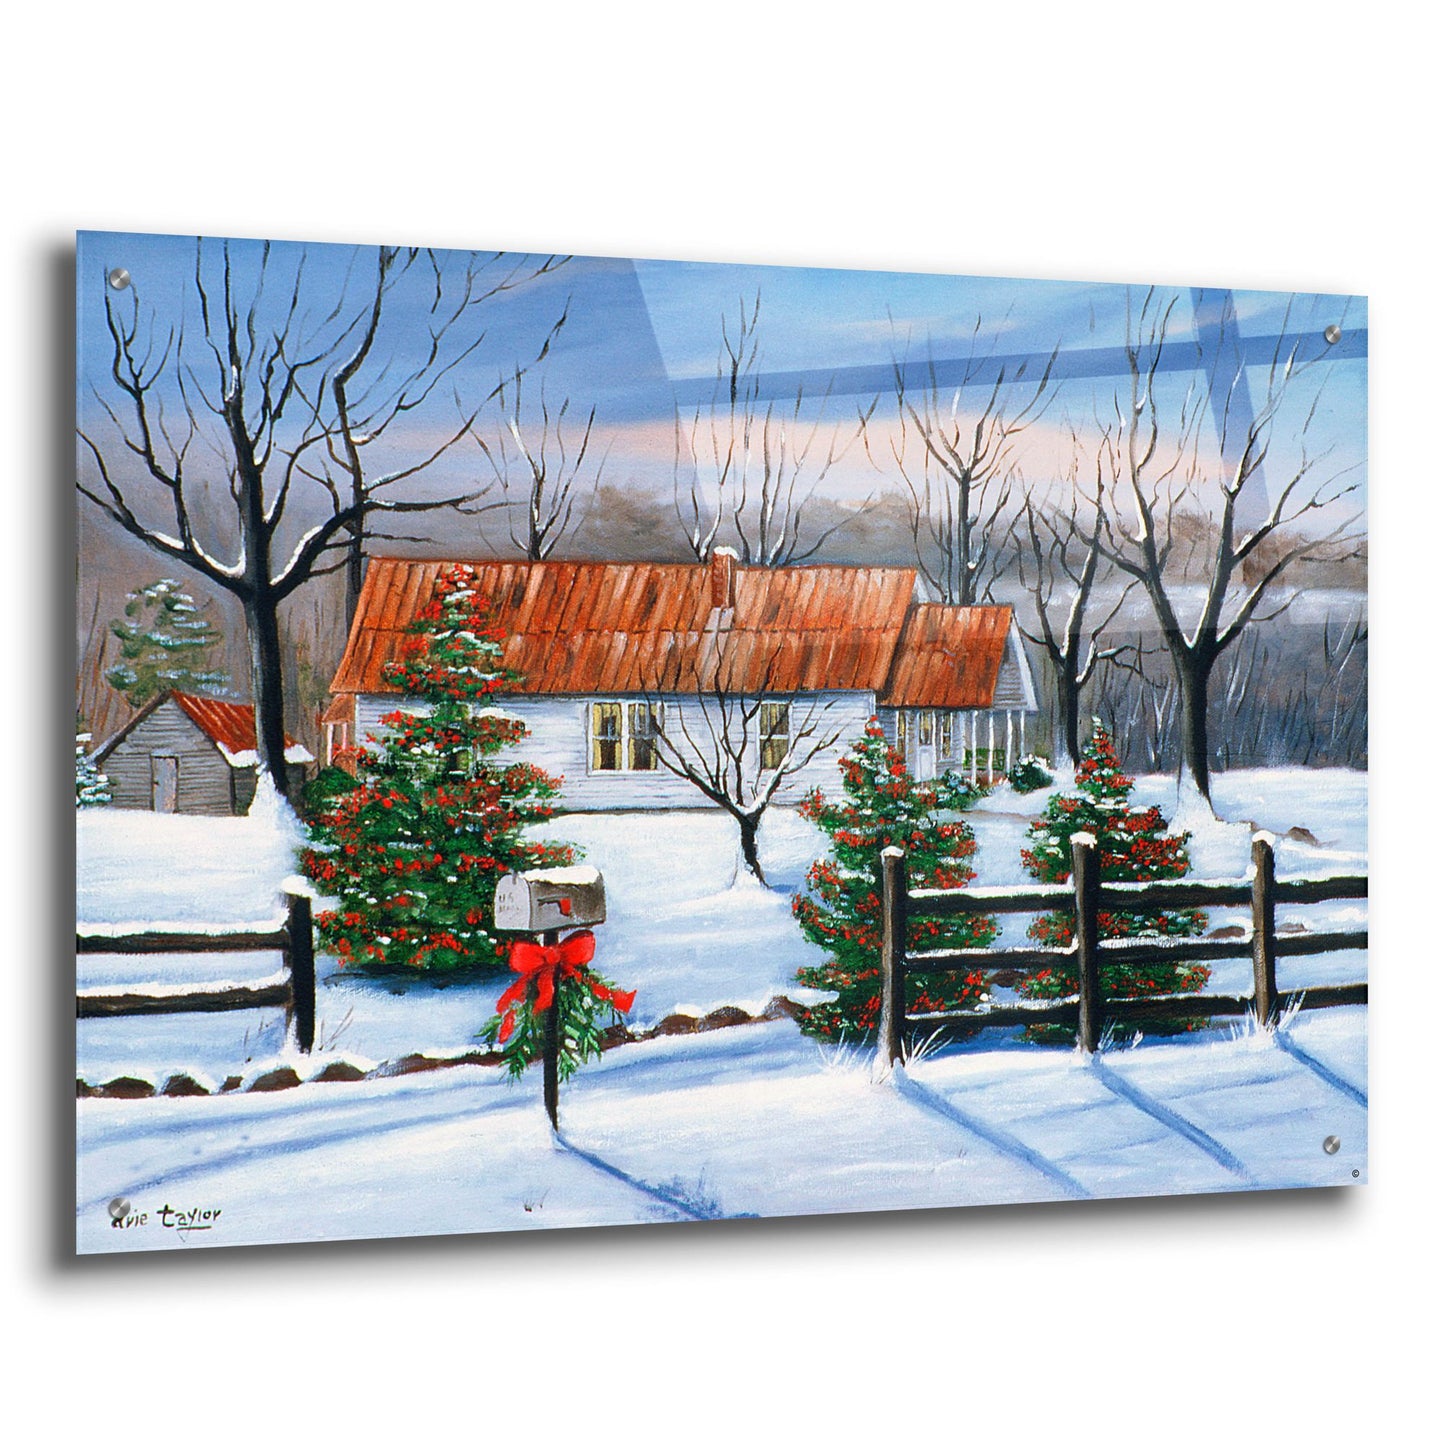 Epic Art 'Mom and Dad's at Christmas' by Arie Reinhardt Taylor, Acrylic Glass Wall Art,36x24